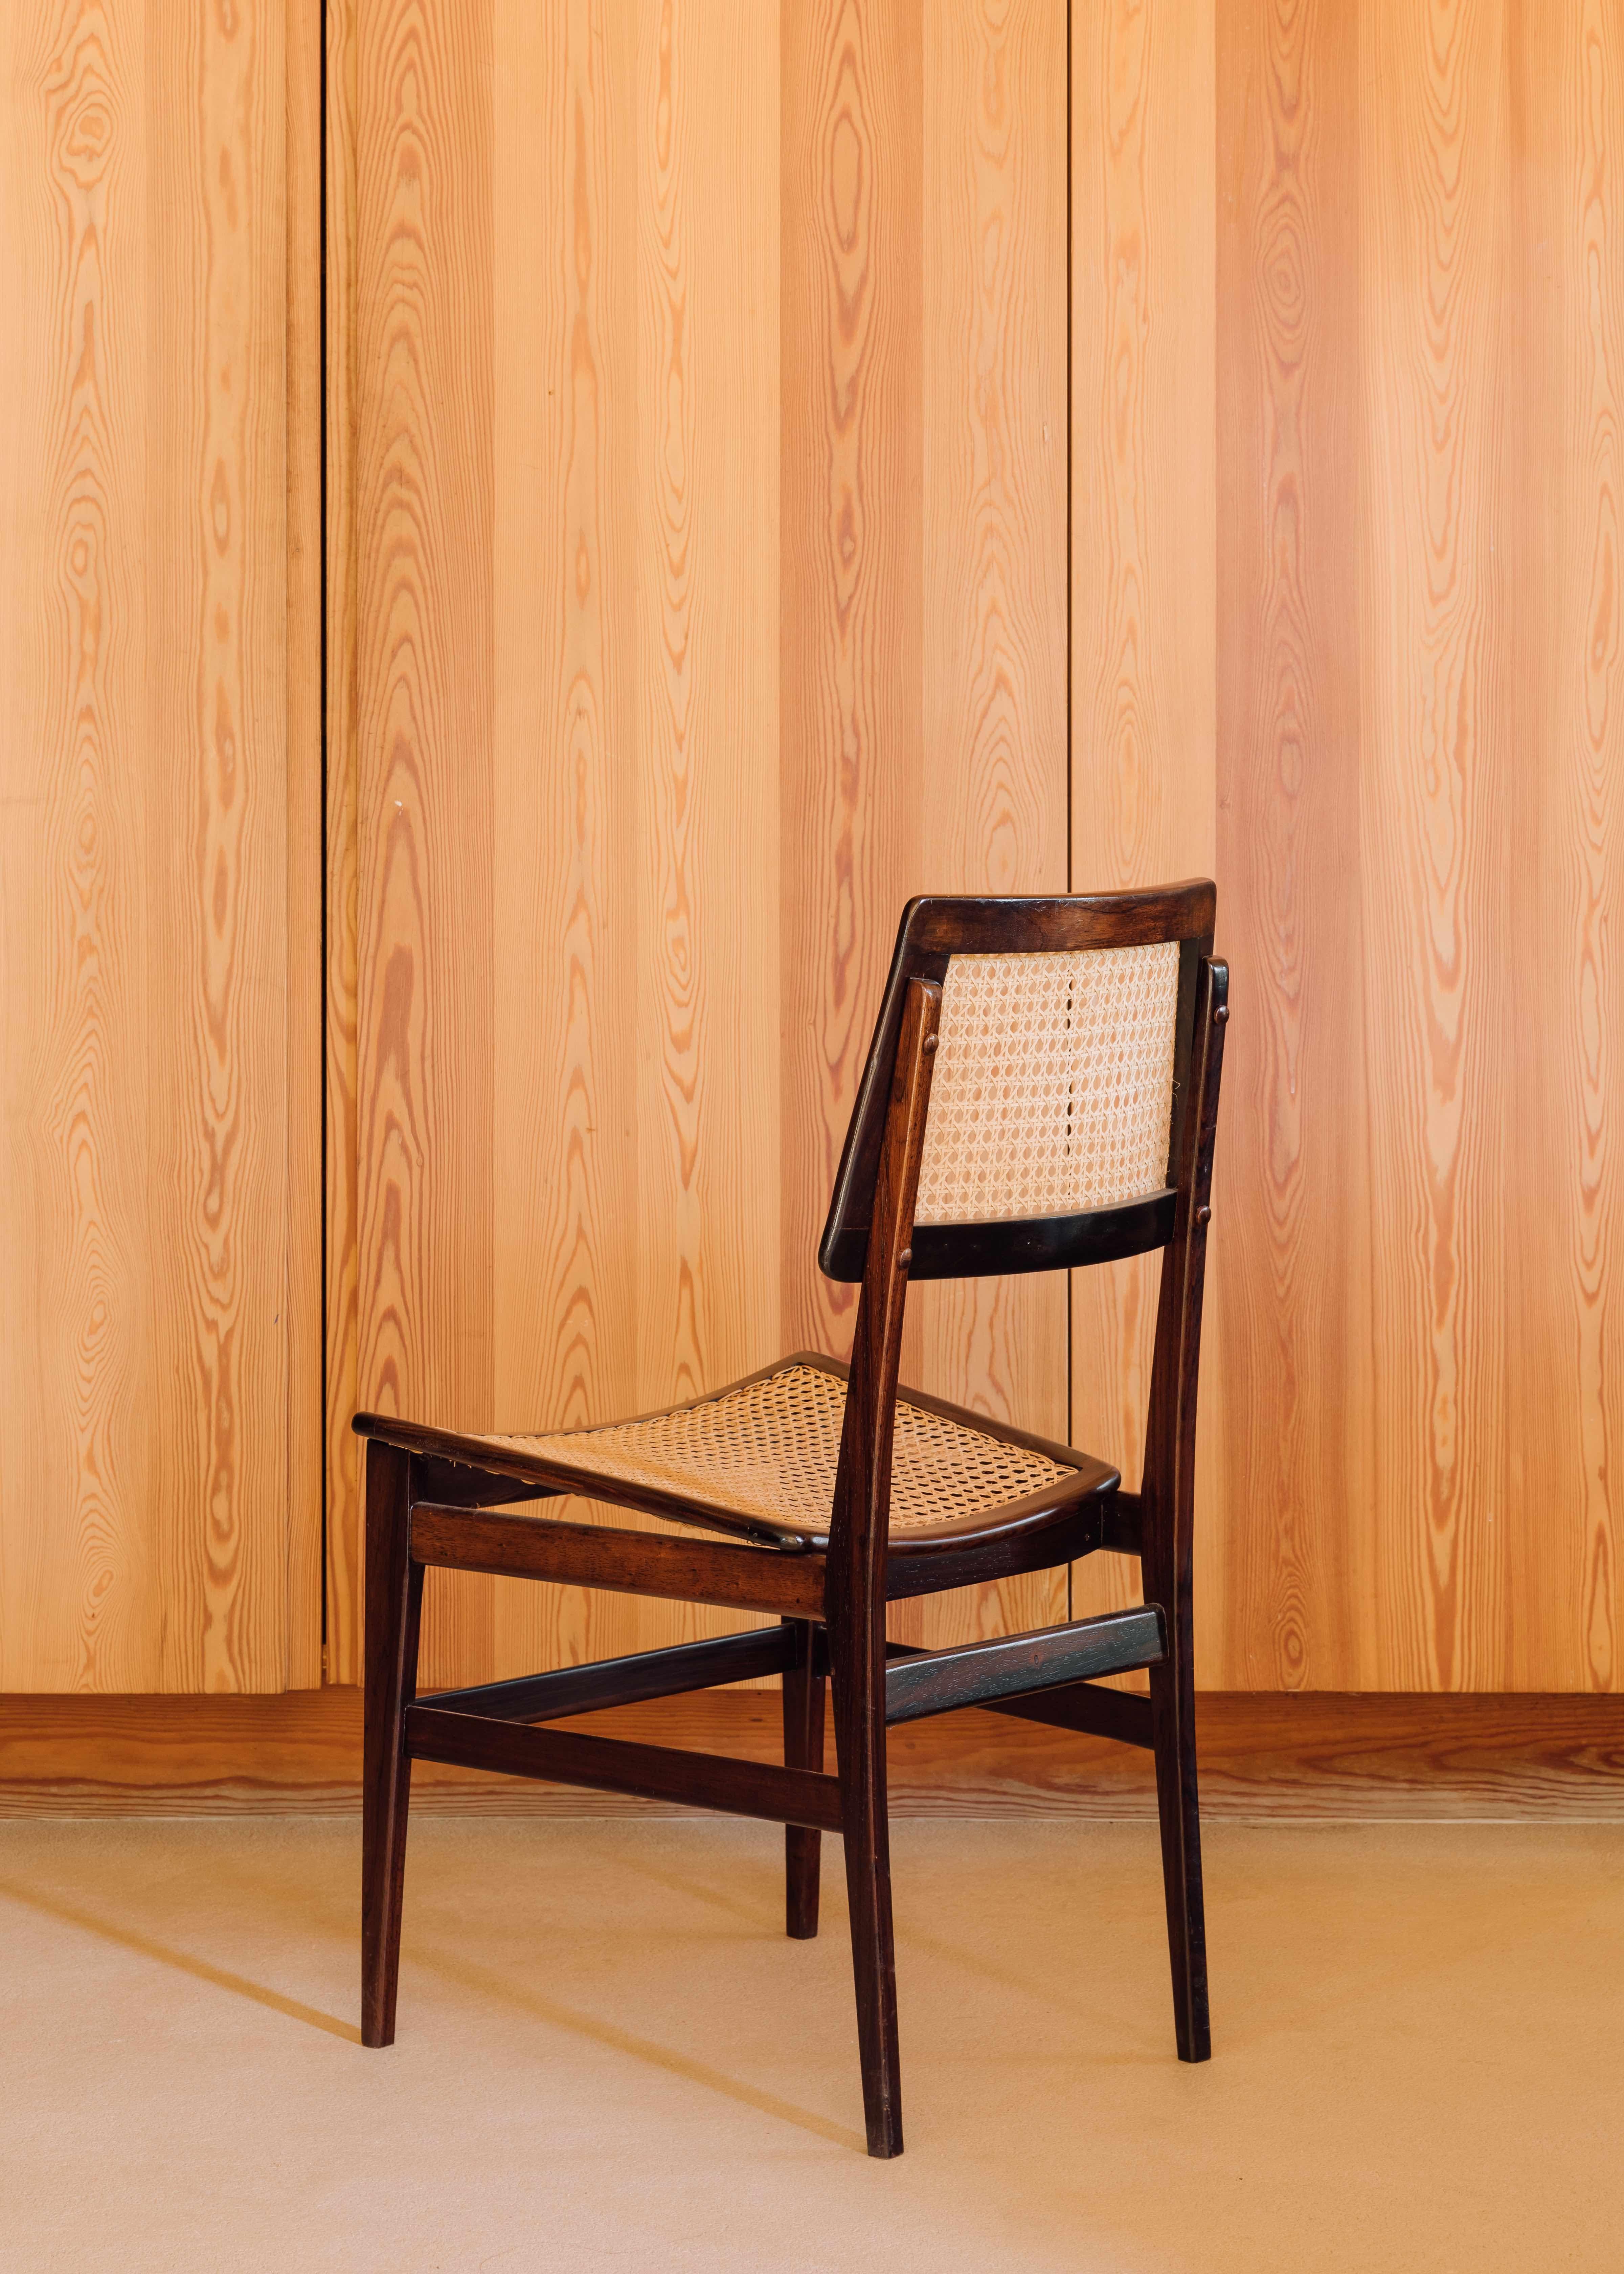 Set of 4 Cane and Rosewood Side Chairs by Joaquim Tenreiro, 1960 In Good Condition For Sale In Melides, PT